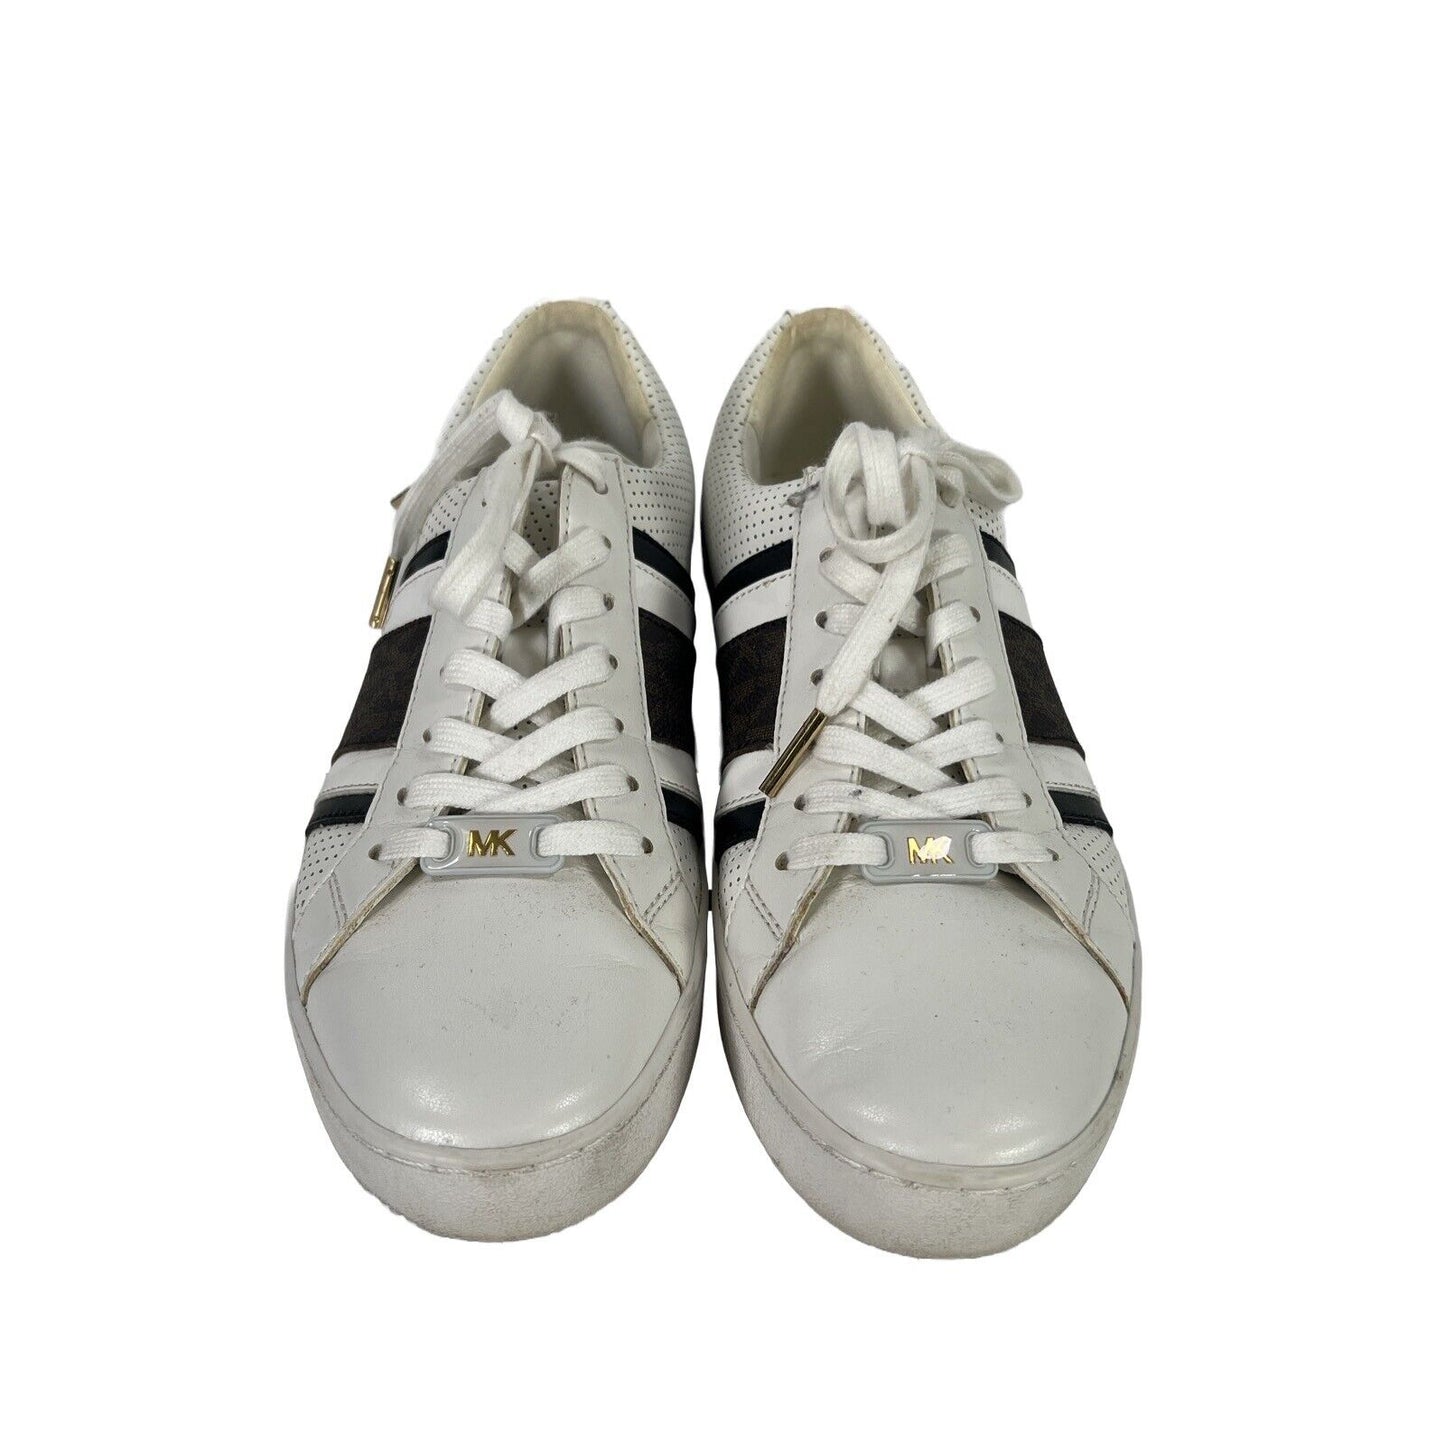 Michael Kors Women's White Lace Up Athletic Sneakers - 7